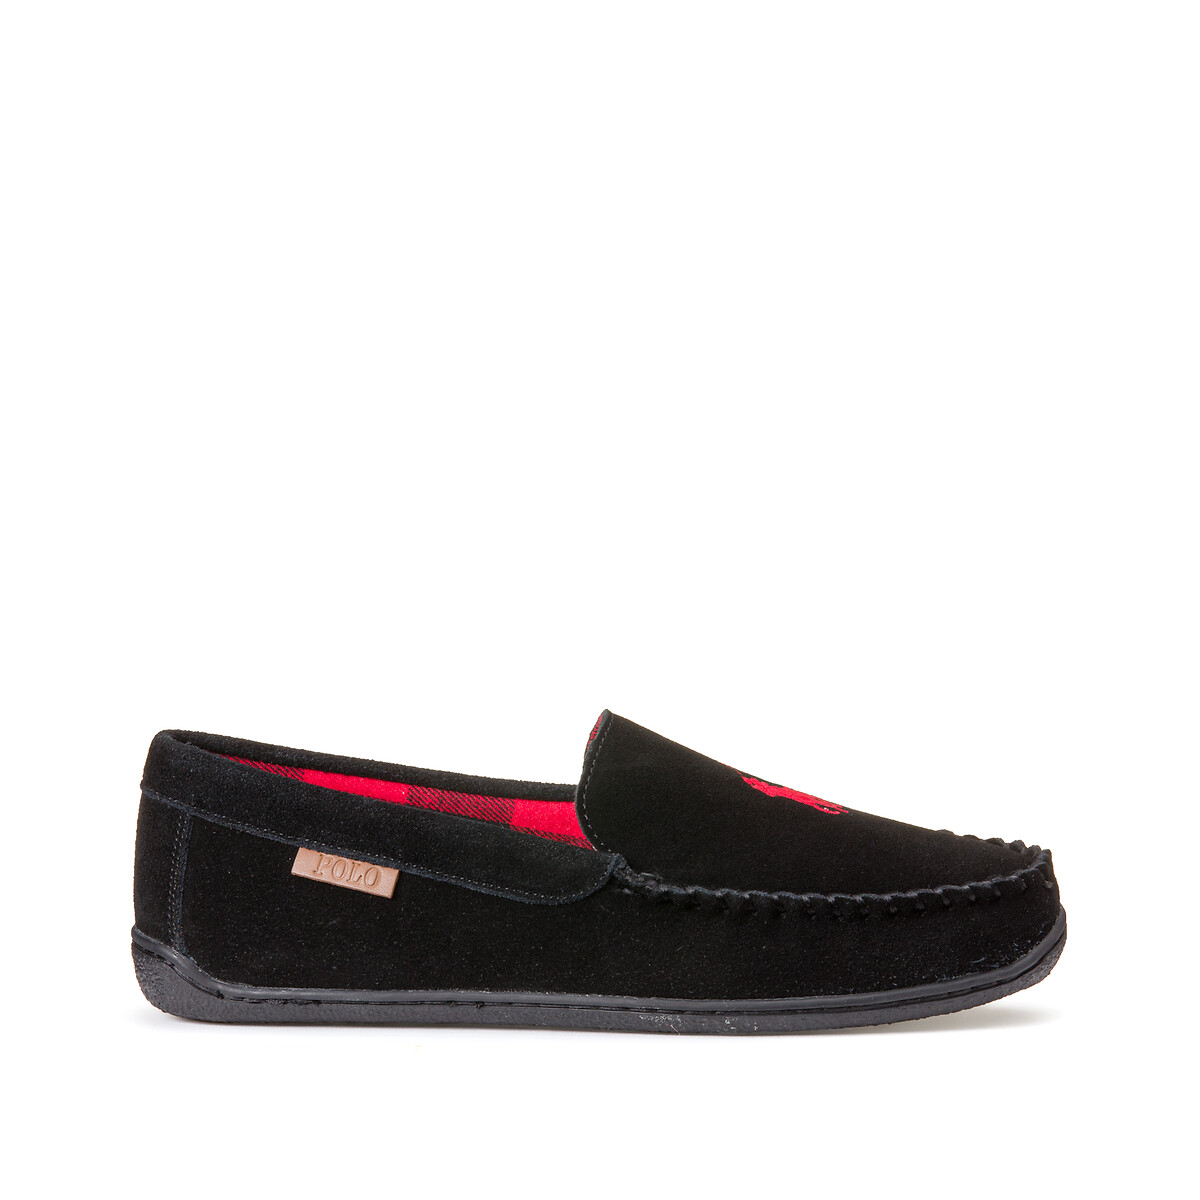 Image of Brenan Loafer Slippers with Faux Fur Lining